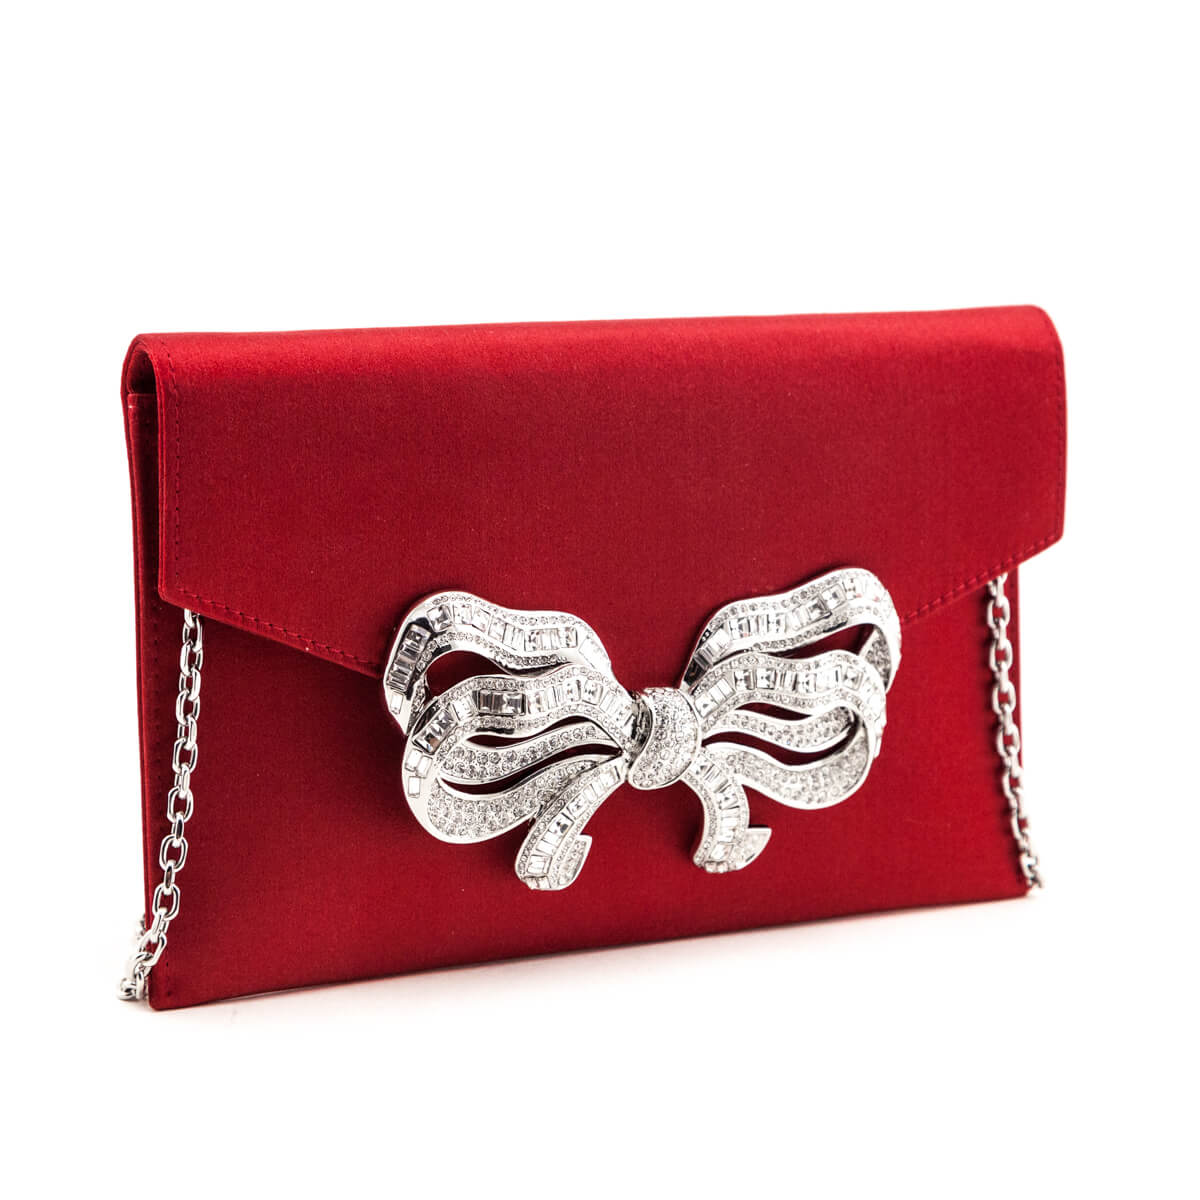 Judith Leiber Red Satin Bow Envelope Clutch - Love that Bag etc - Preowned Authentic Designer Handbags & Preloved Fashions